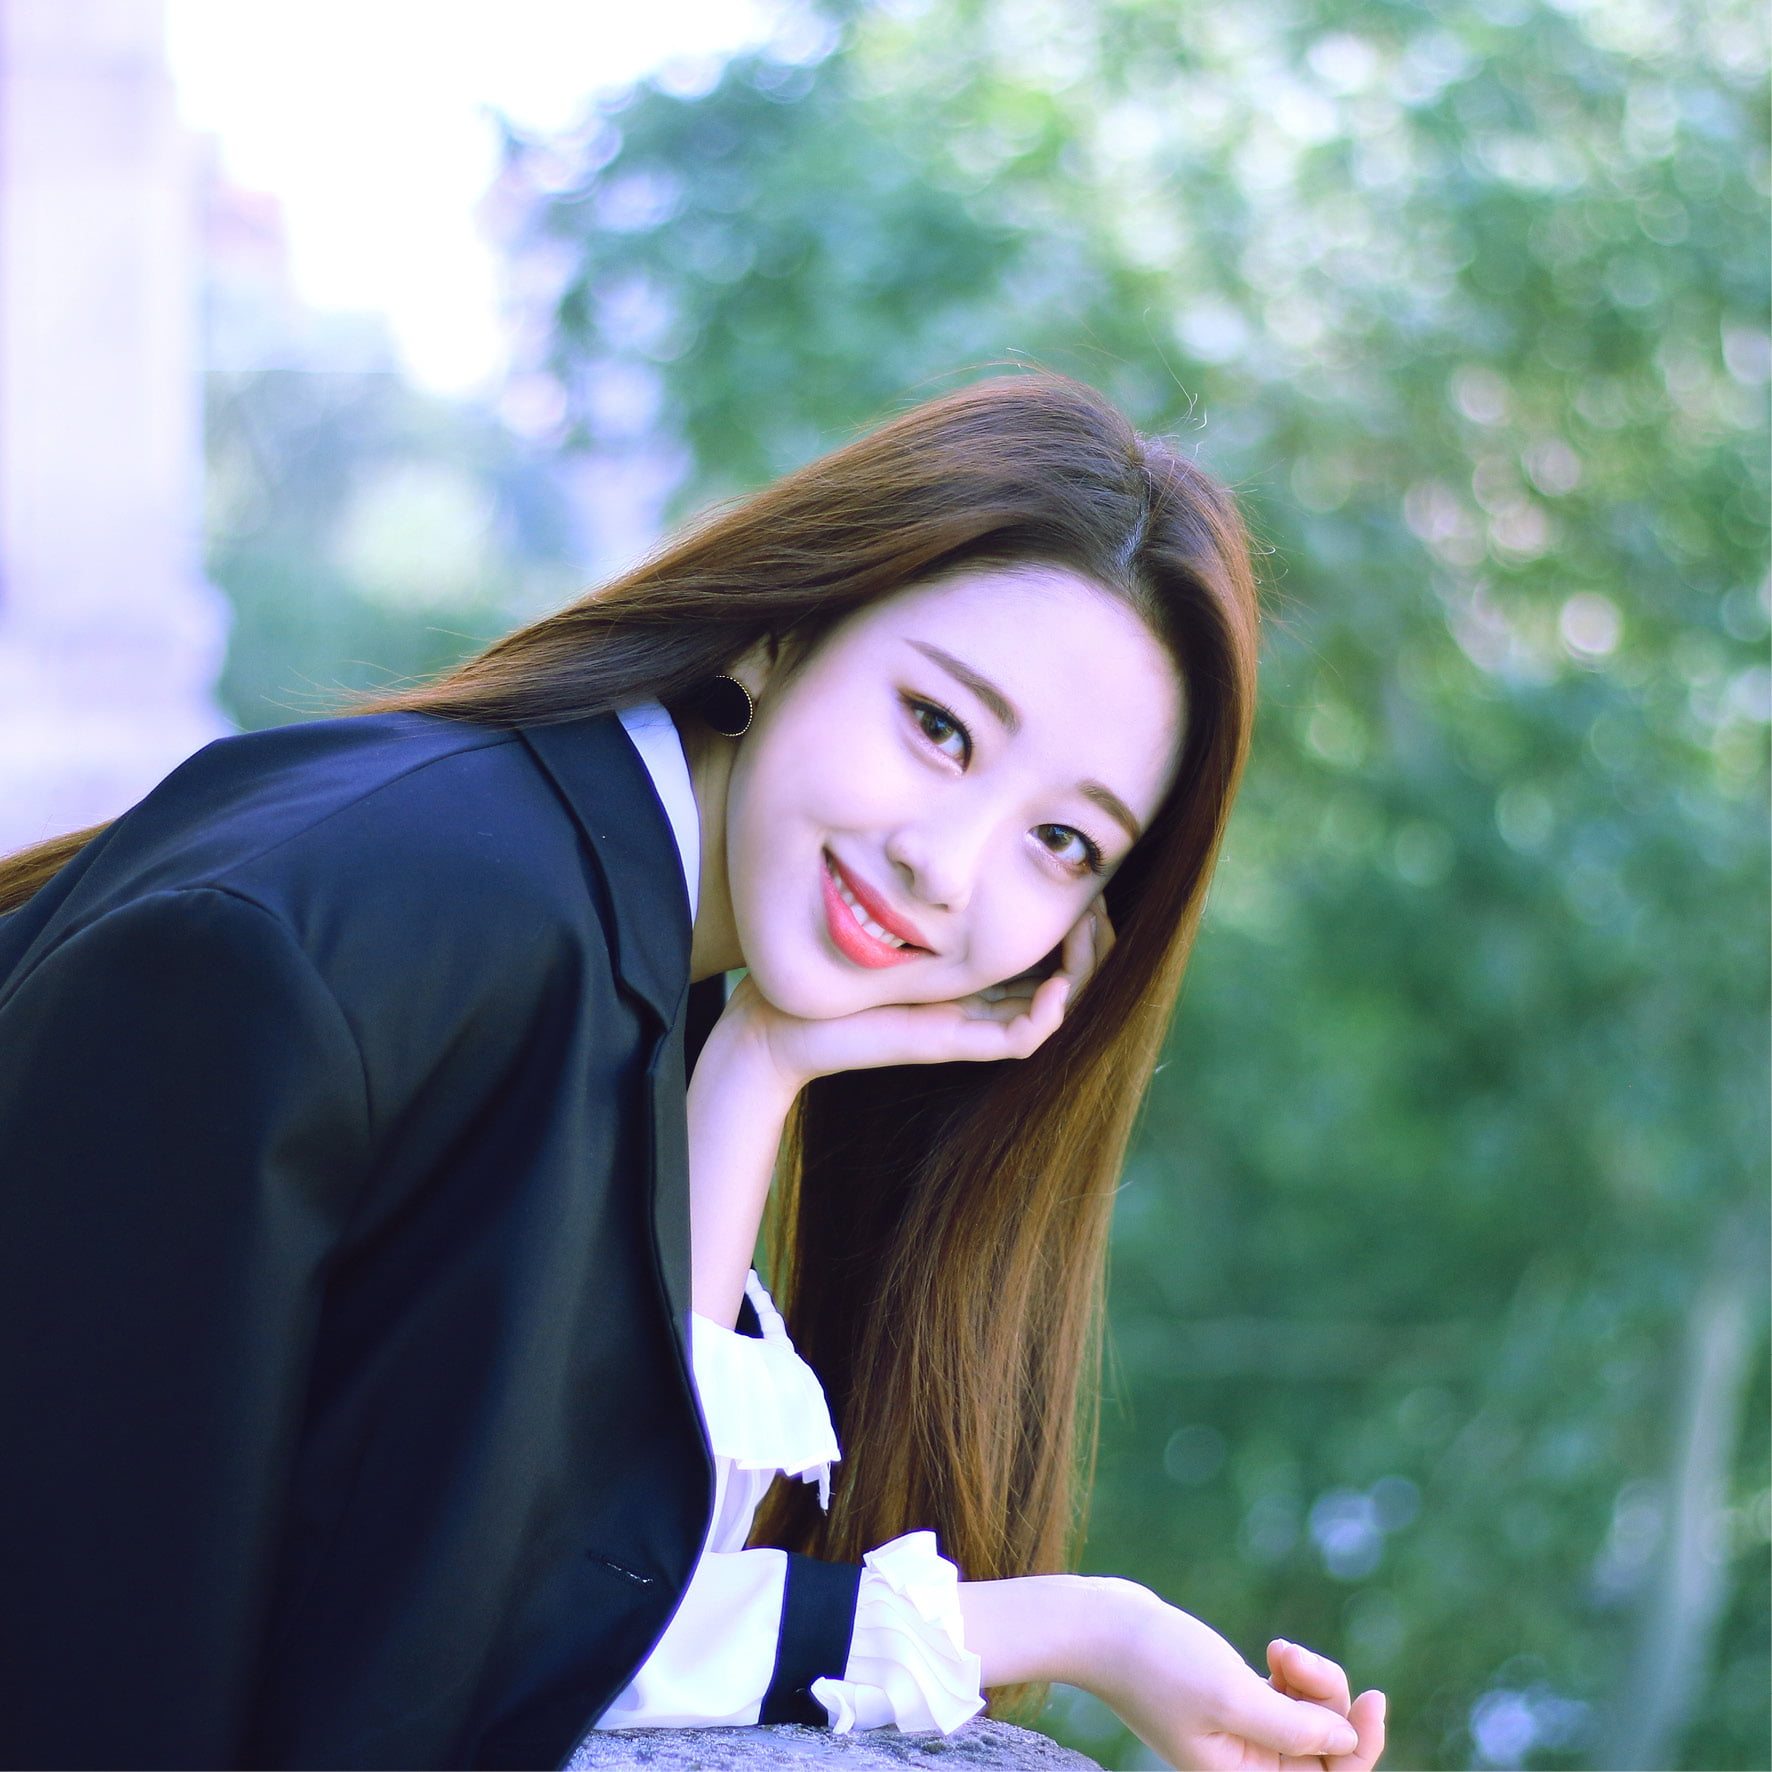 Wallpaper Loona, K Pop, Yves, Young Adult, Loona Wallpaper, Other